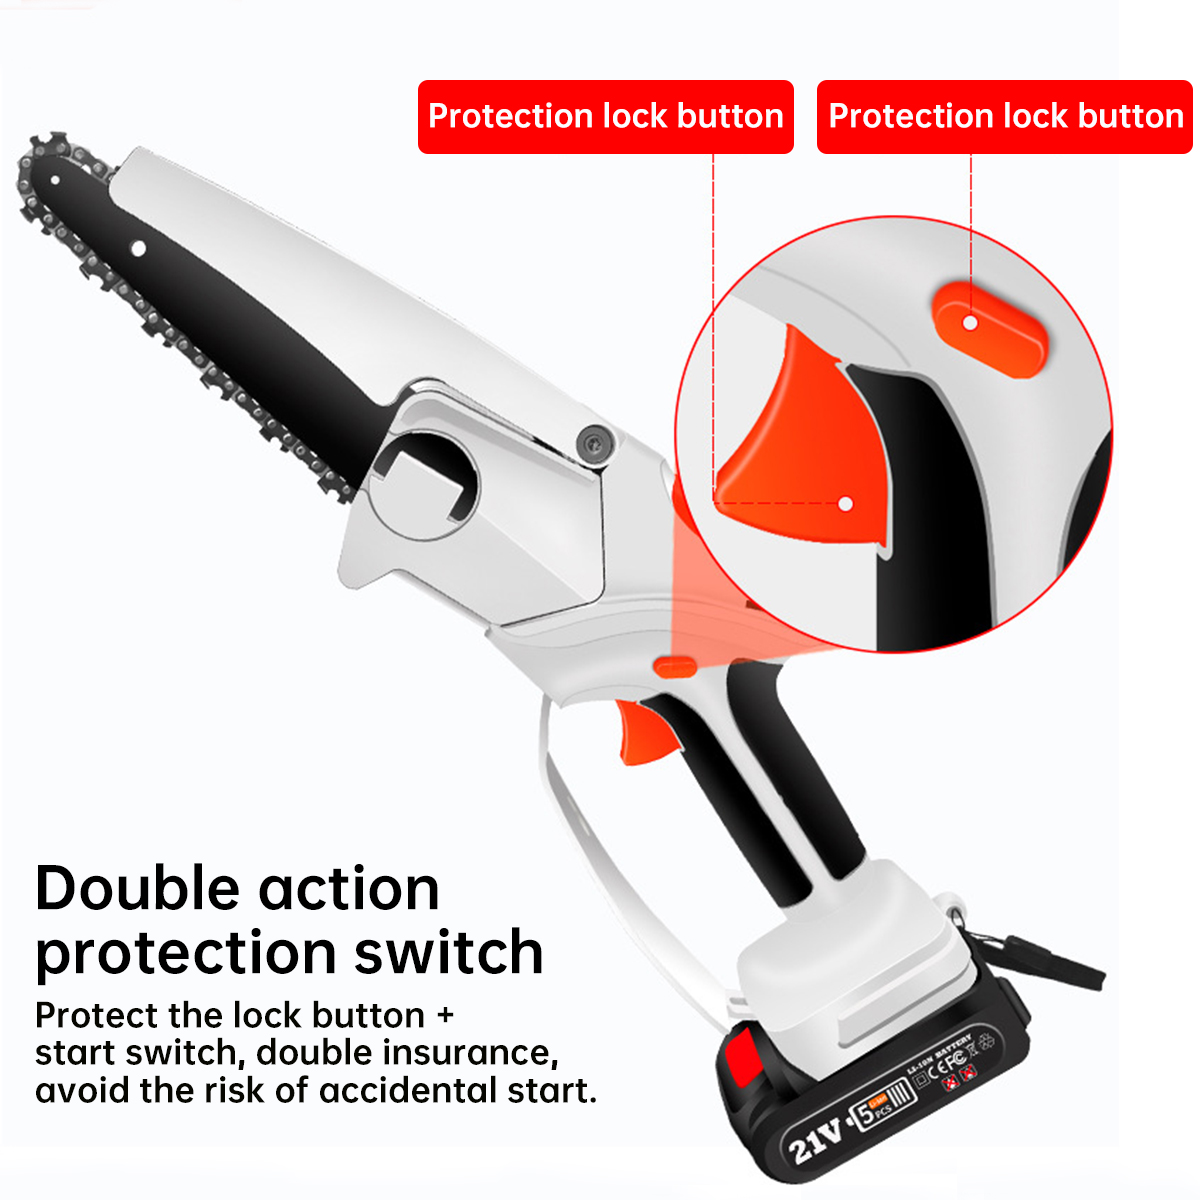 6-Inch-Portable-Electric-Chain-Saw-Mini-Cordless-Rechargeable-Woodworking-Wood-Cutting-Tool-W-12-Bat-1886164-3